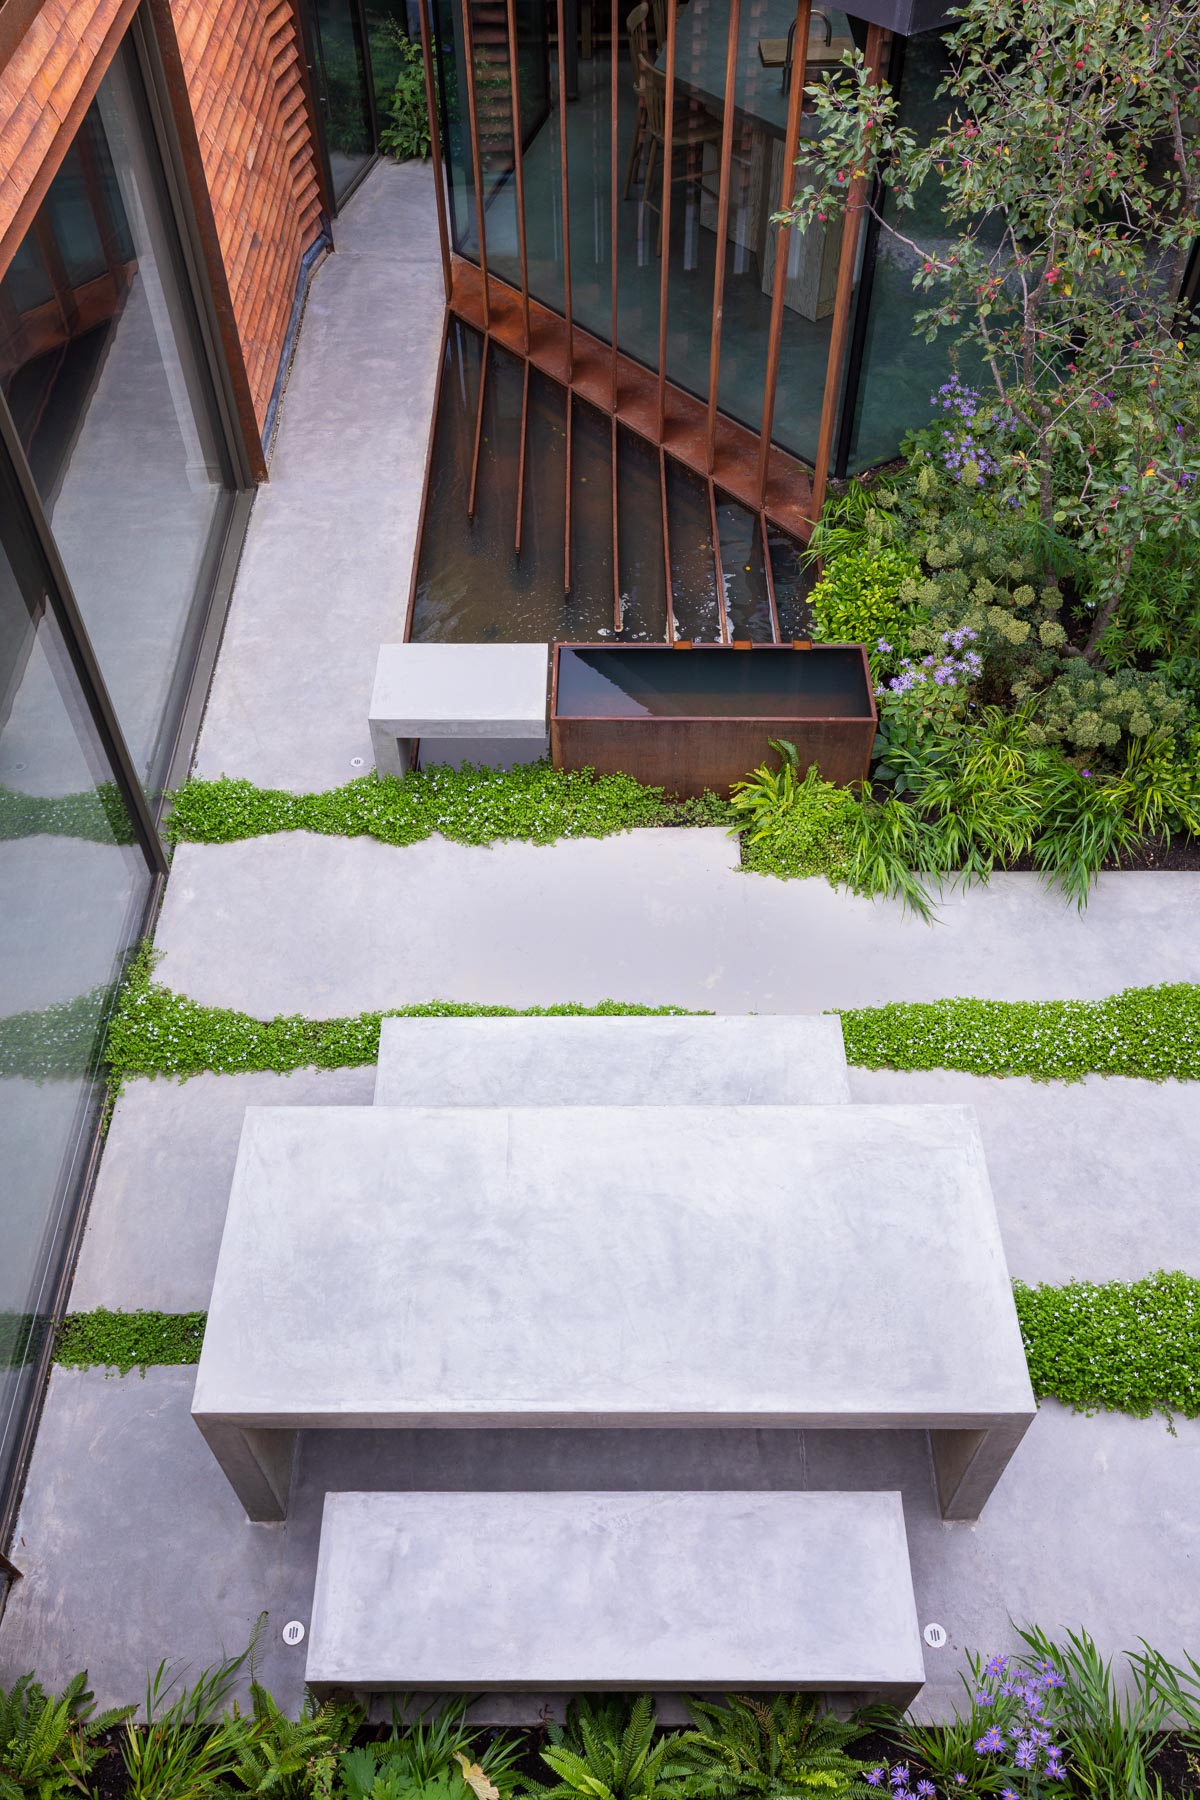 Colm Joseph Cambridge modern designer Petersen bricks corten steel water feature concrete table and benches naturalistic planting view from above